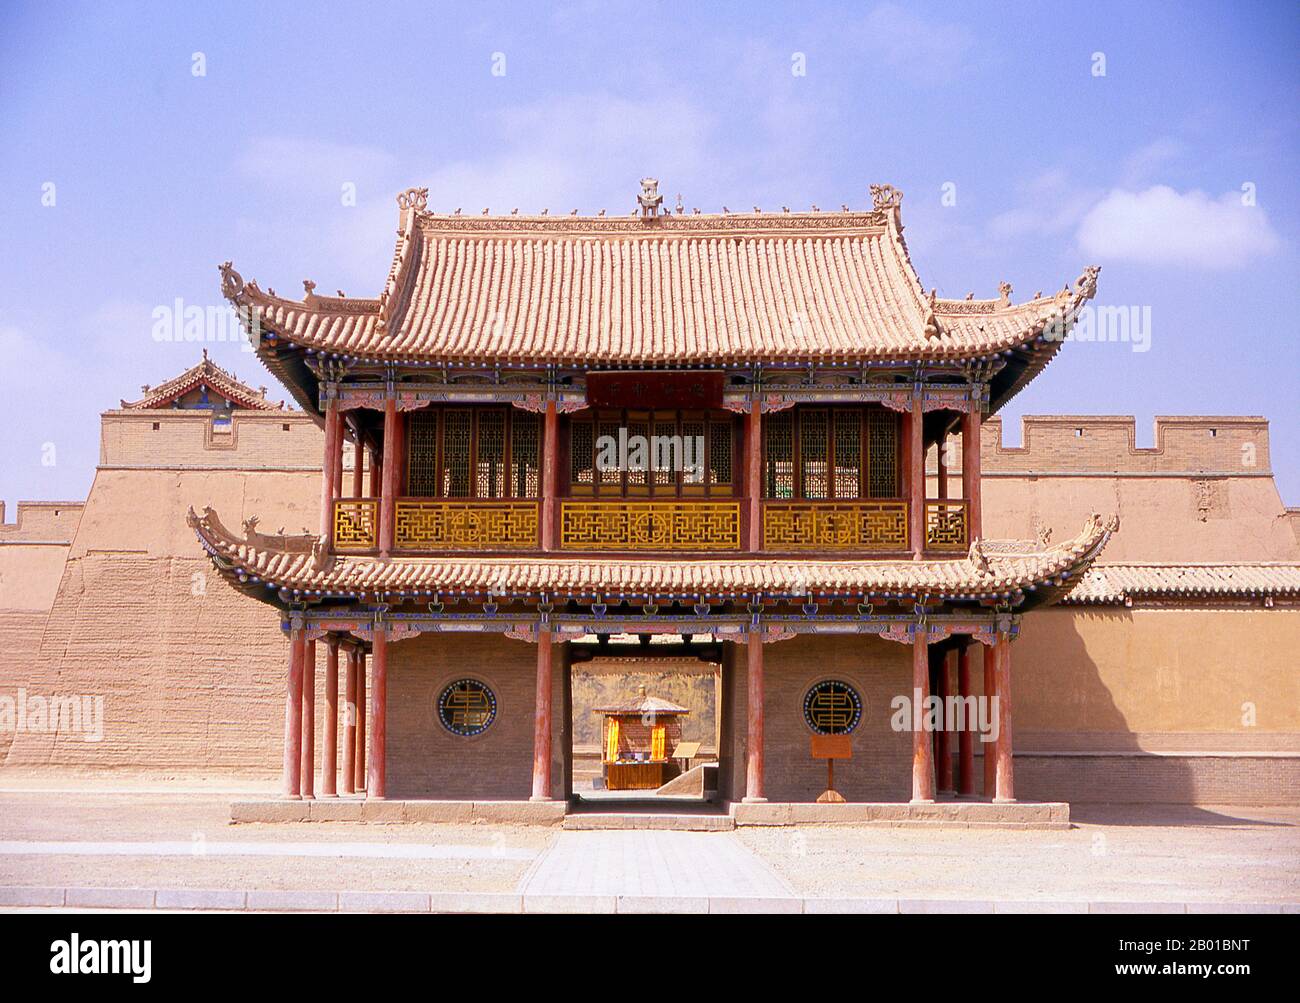 China: Wenchang Hall, Jiayuguan Fort, Jiayuguan, Gansu.  Jiayuguan, the ‘First and Greatest Pass under Heaven’, was completed in 1372 on the orders of Zhu Yuanzhang, the first Ming Emperor (1368-98), to mark the end of the Ming Great Wall. It was also the very limits of Chinese civilisation, and the beginnings of the outer ‘barbarian’ lands.  For centuries the fort was not just of strategic importance to Han Chinese, but of cultural significance as well. This was the last civilised place before the outer darkness, and those proceeding beyond faced a life of exile among nomadic strangers. Stock Photo